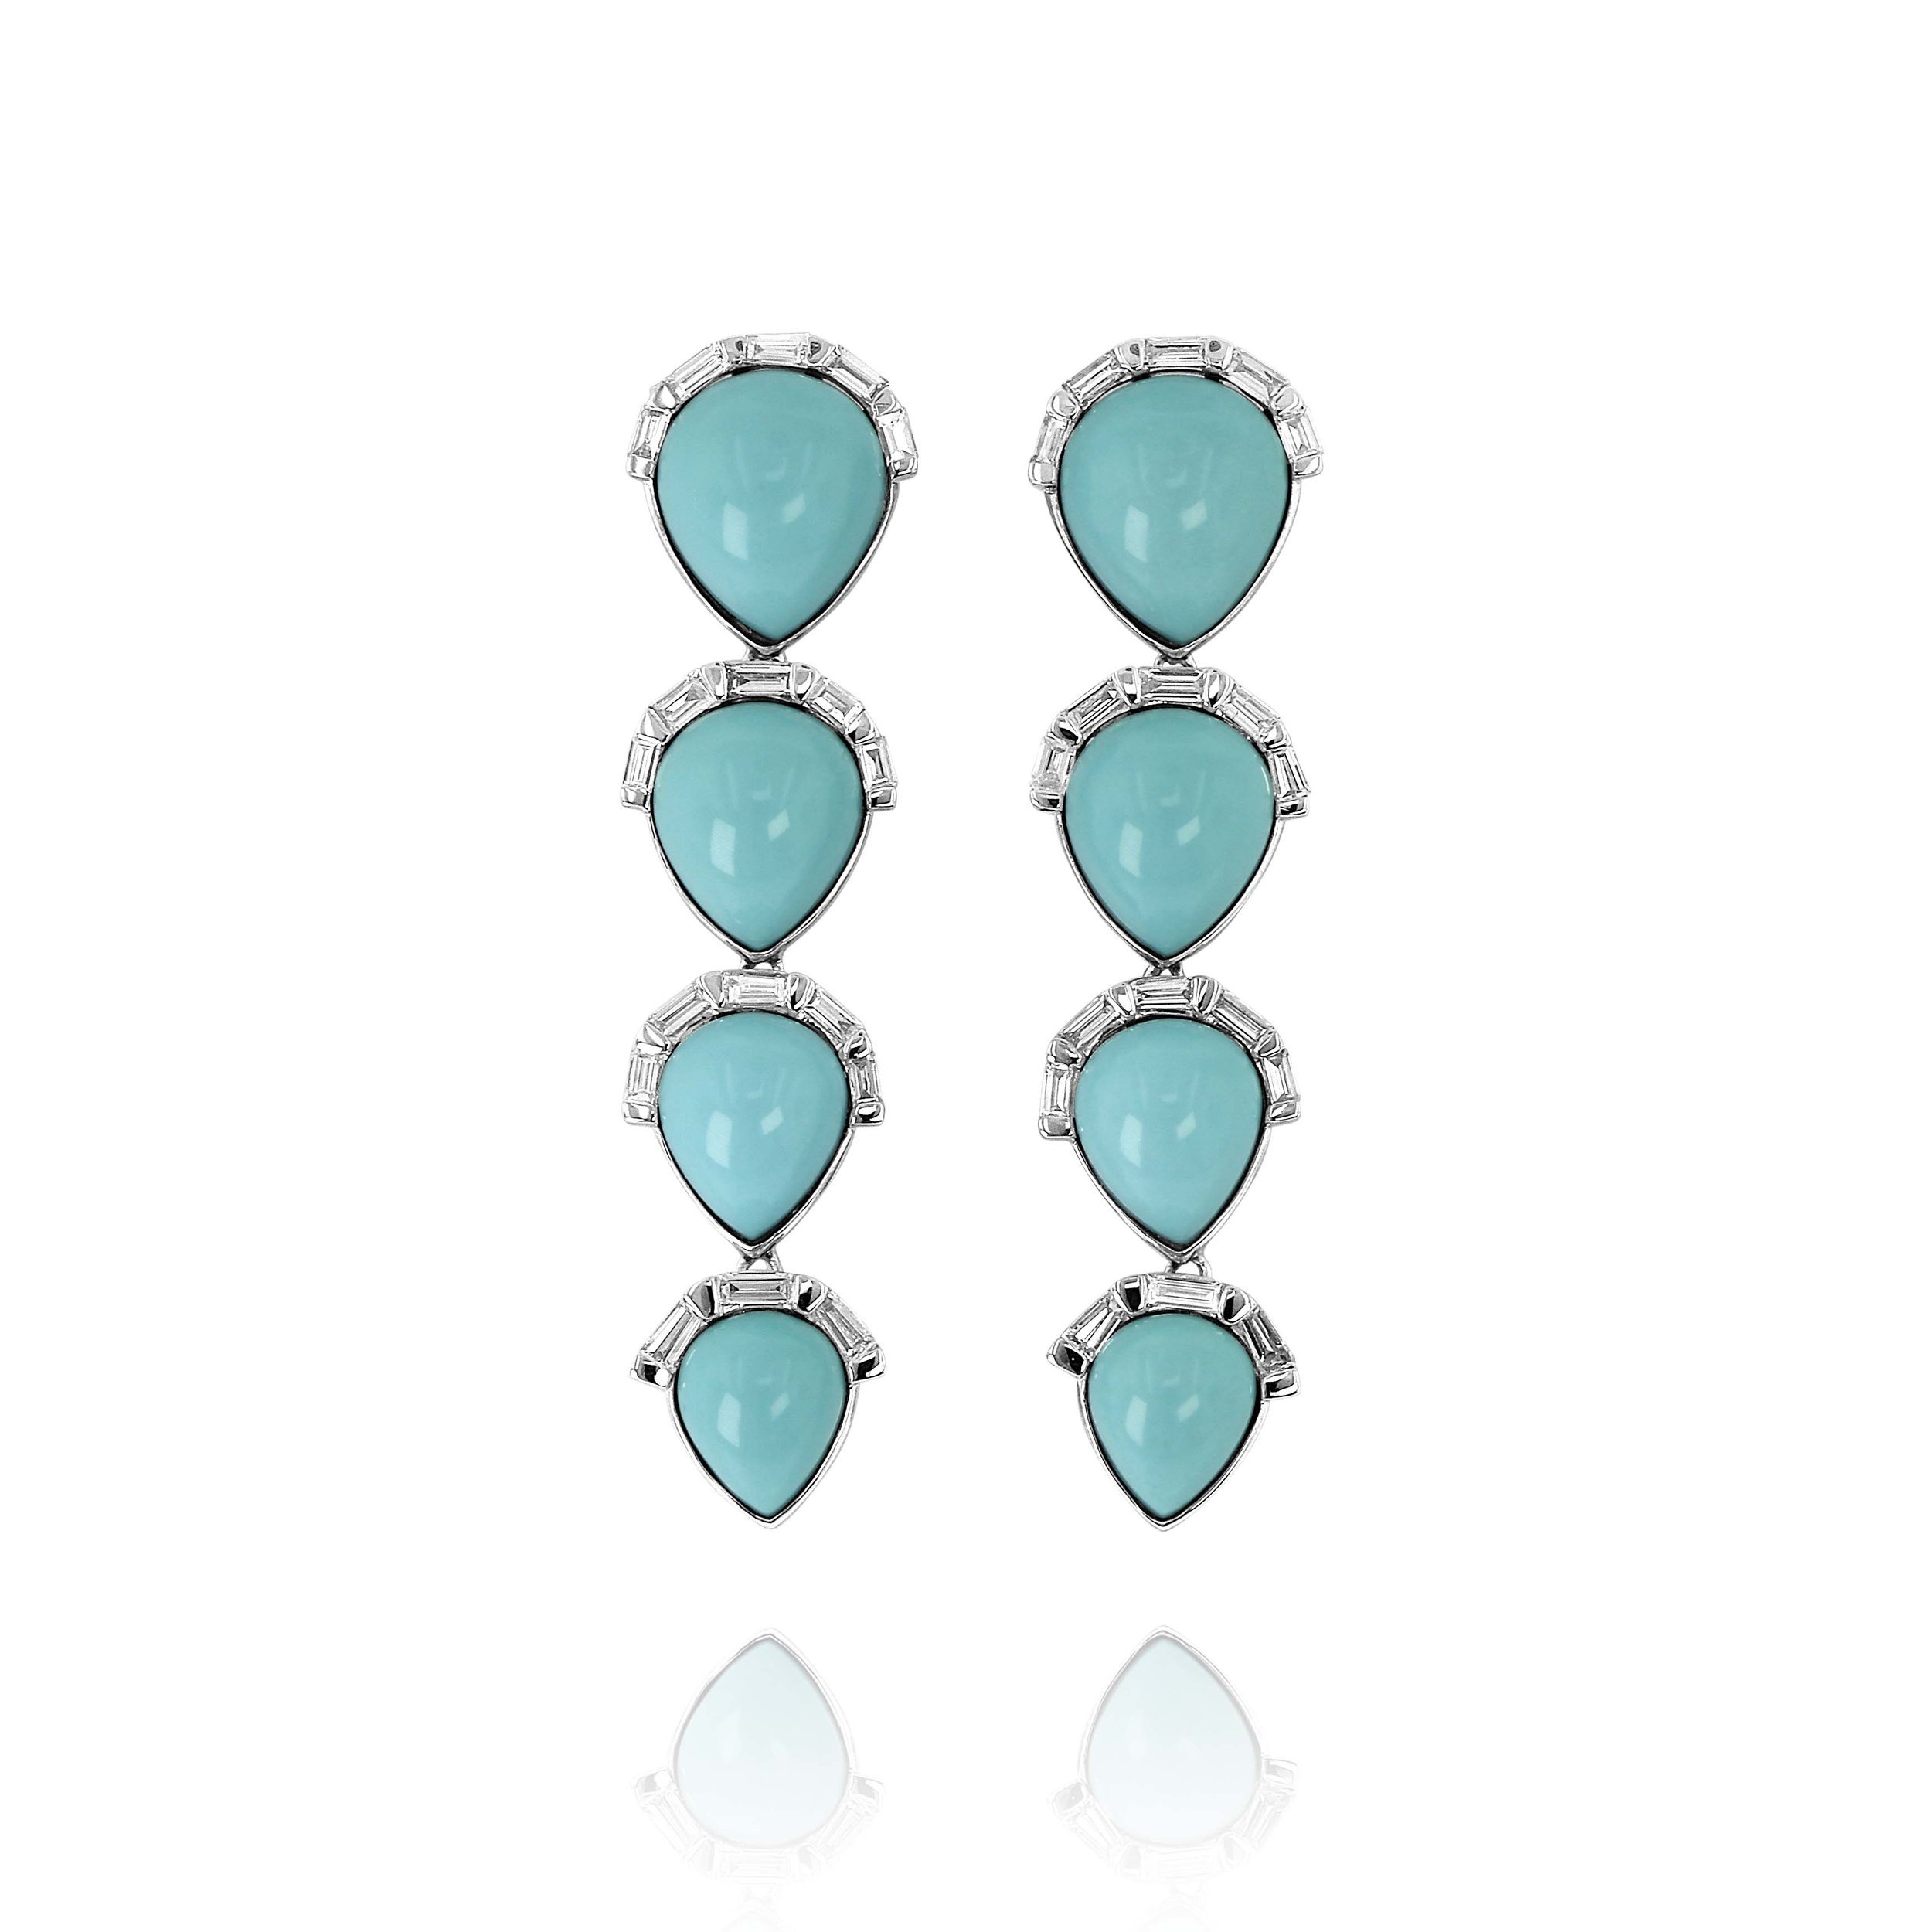 Turquoise+Earrings+with+Diamond+Accents.jpg